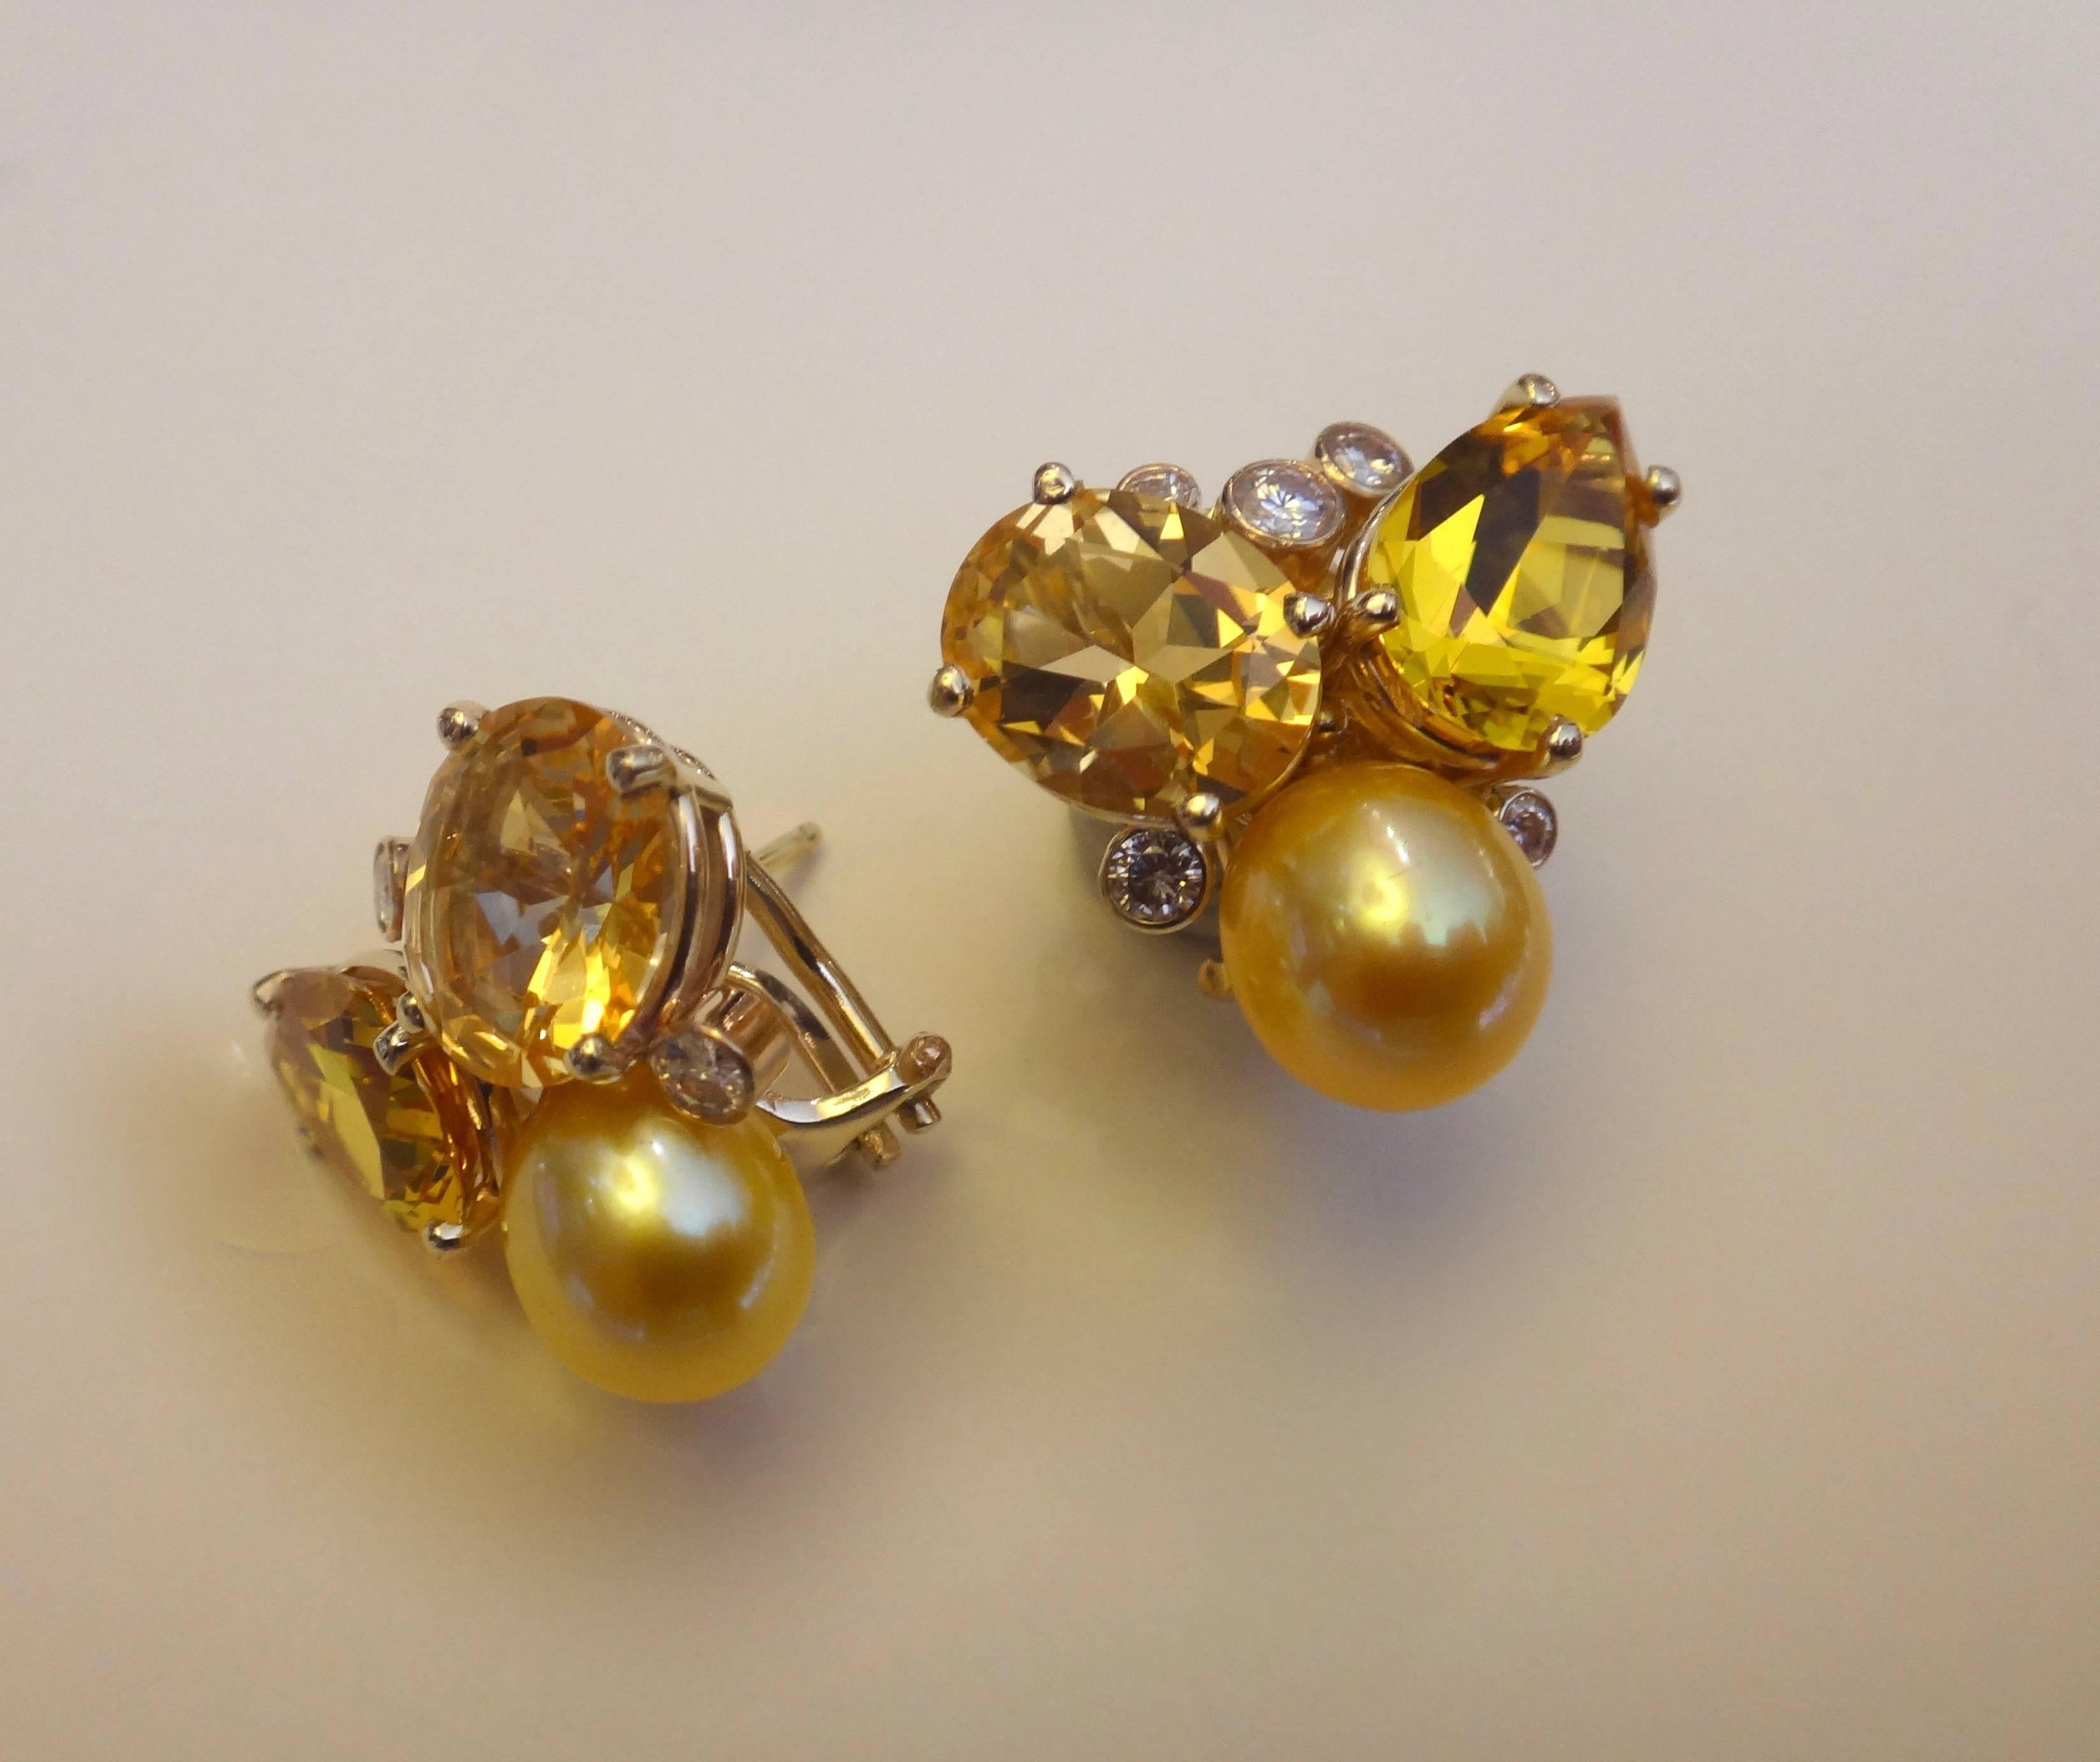  Oval cut golden topaz, pear shaped citrines, golden pearls and white diamonds are combined in these bright and glittering Confetti earrings.  The gems are both prong and bezel set.  The earrings come with post and omega clips for comfort and